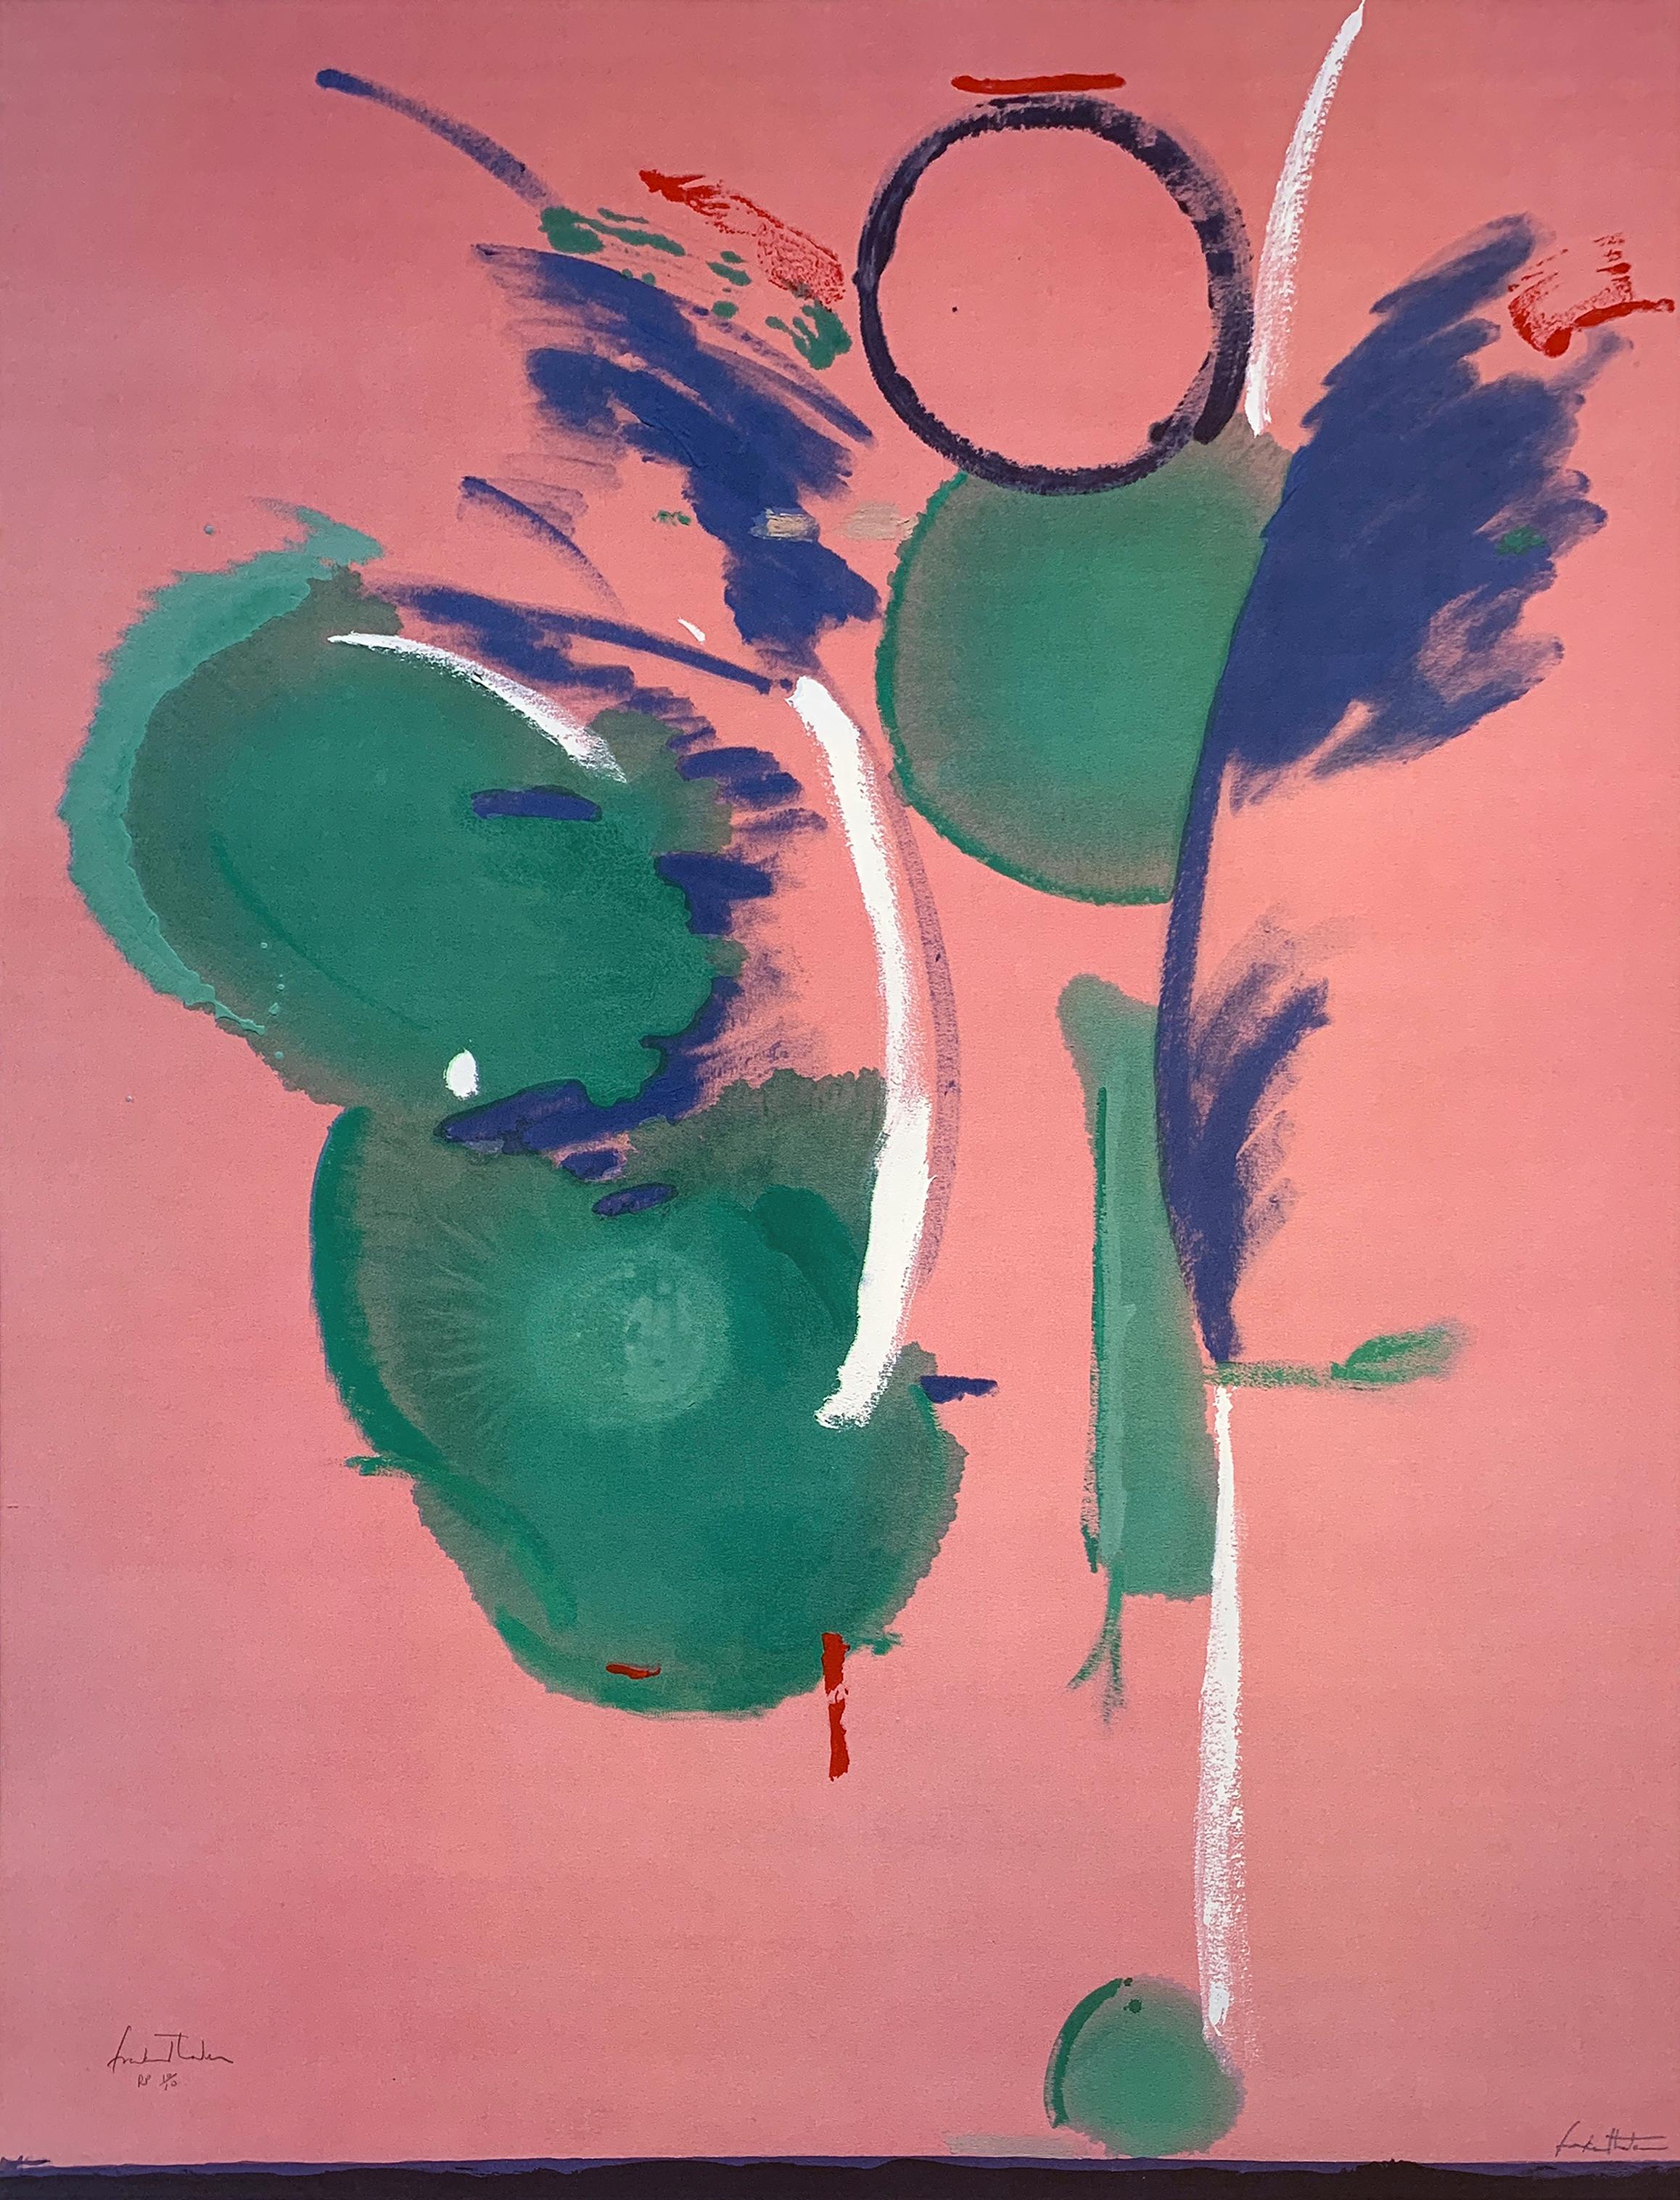 Mary, Mary; 1990; Lithograph and Screenprint; 42 1/8 x 32 1/6 inches; Edition of - Print by Helen Frankenthaler